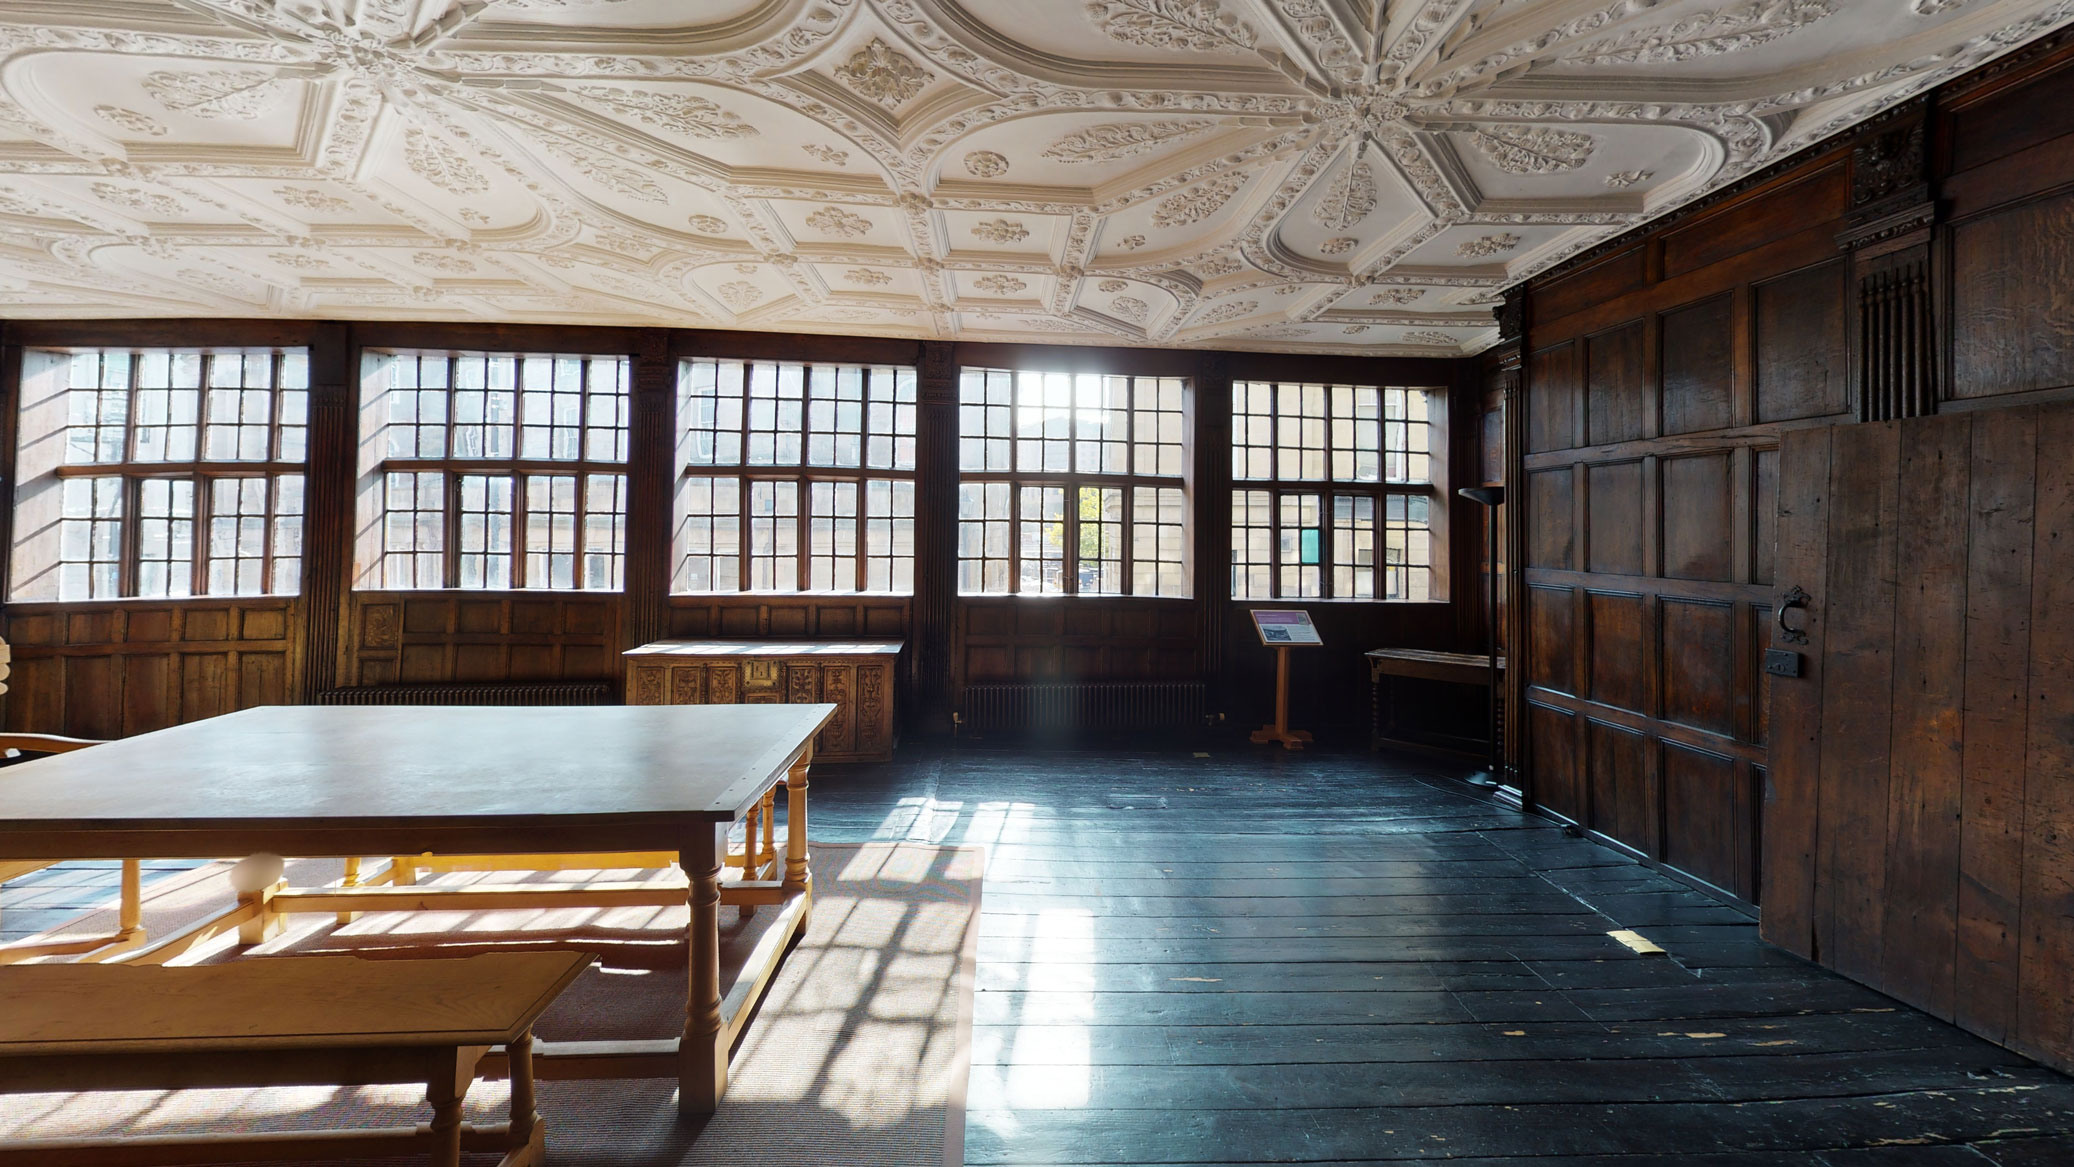 A historic interior with wooden panelling and a stuccoed ceiling, illuminated by a range of historic windows.